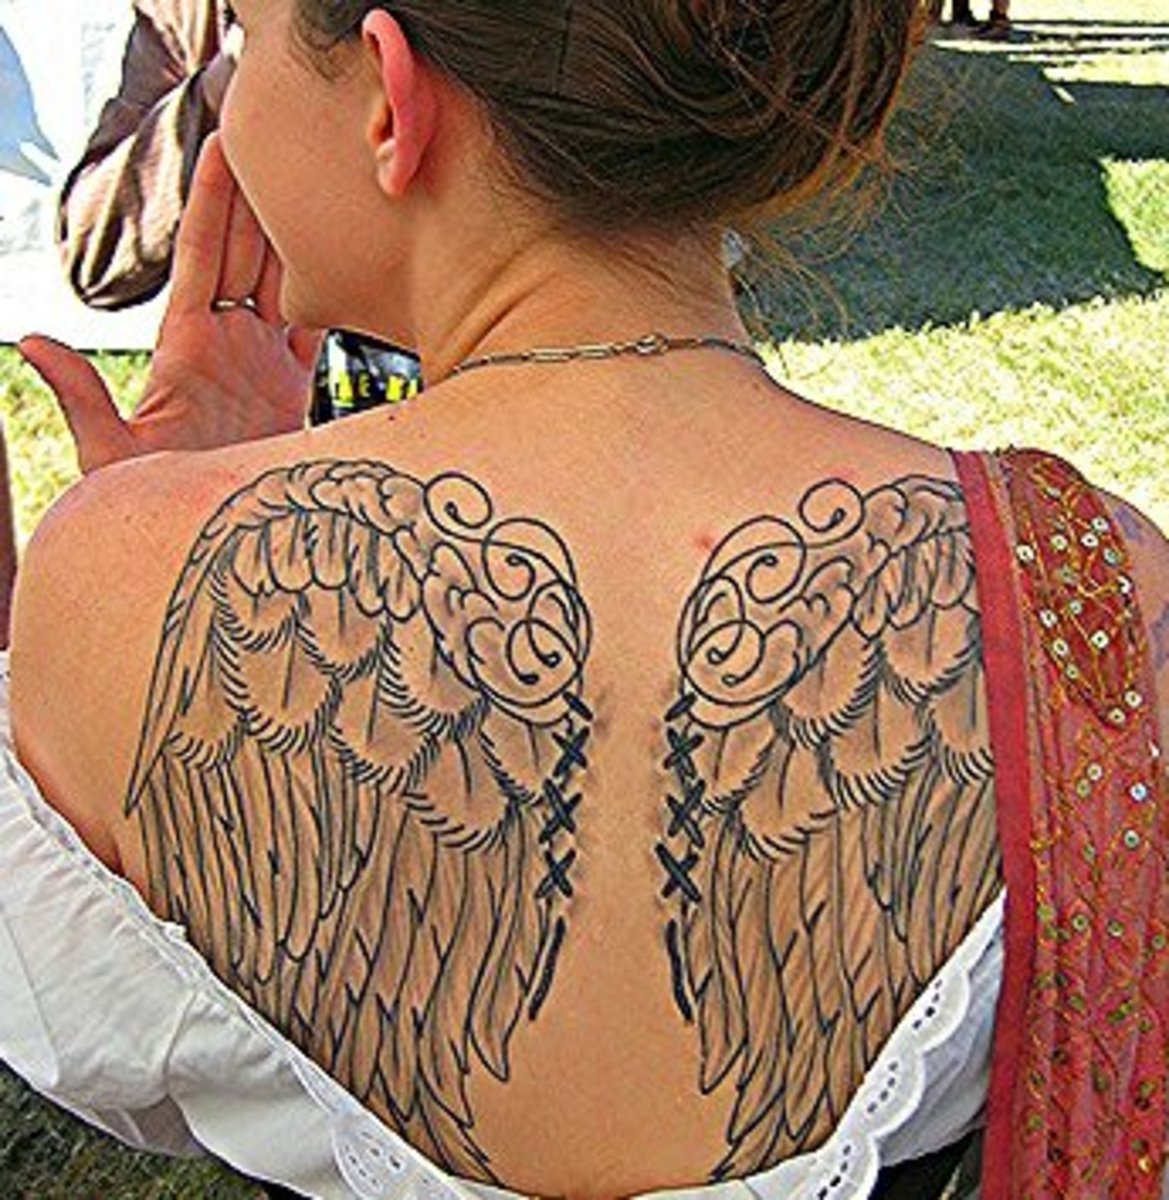 feather-tattoos-and-meanings-feather-tattoo-ideas-and-designs